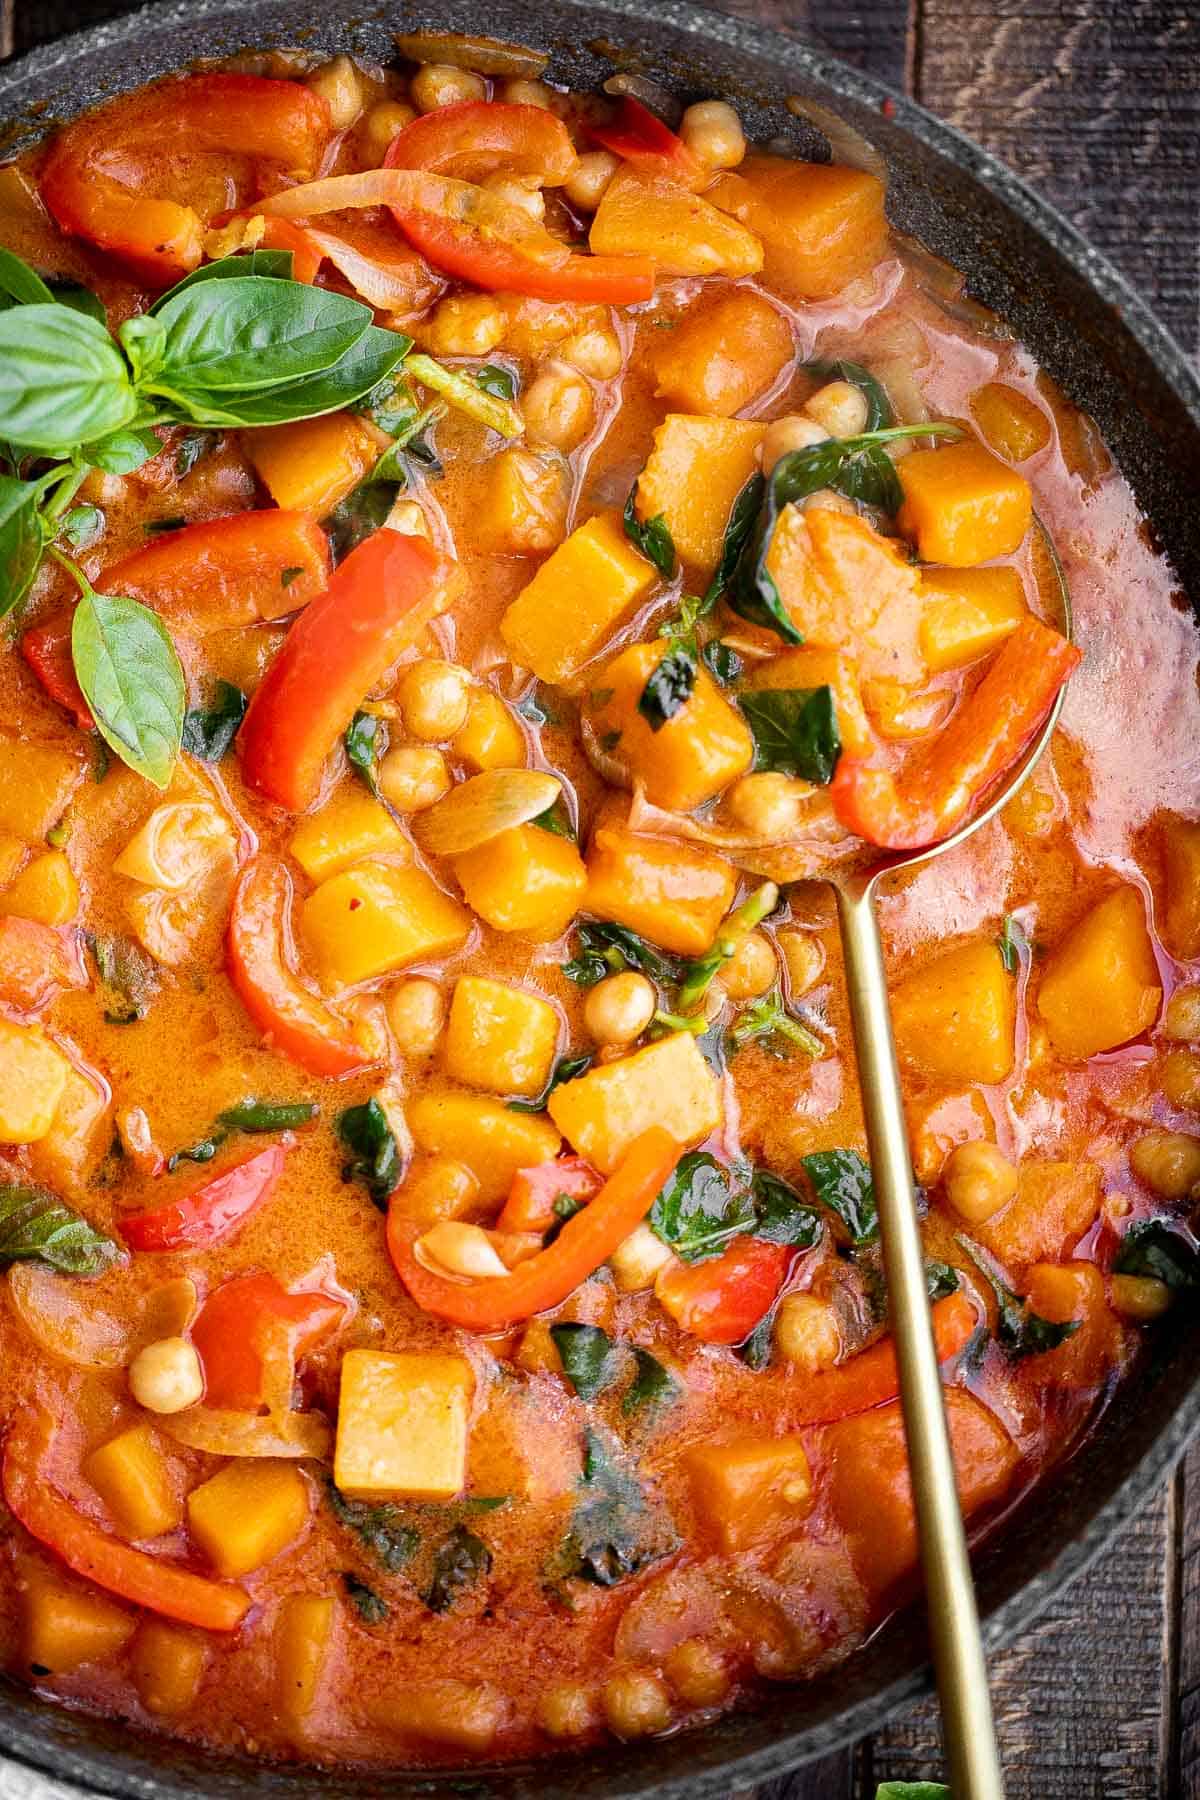 Butternut squash curry with chickpeas is a rich hearty one pot meal that will satisfy your fall comfort food cravings. Great for weeknight family dinners. | aheadofthyme.com